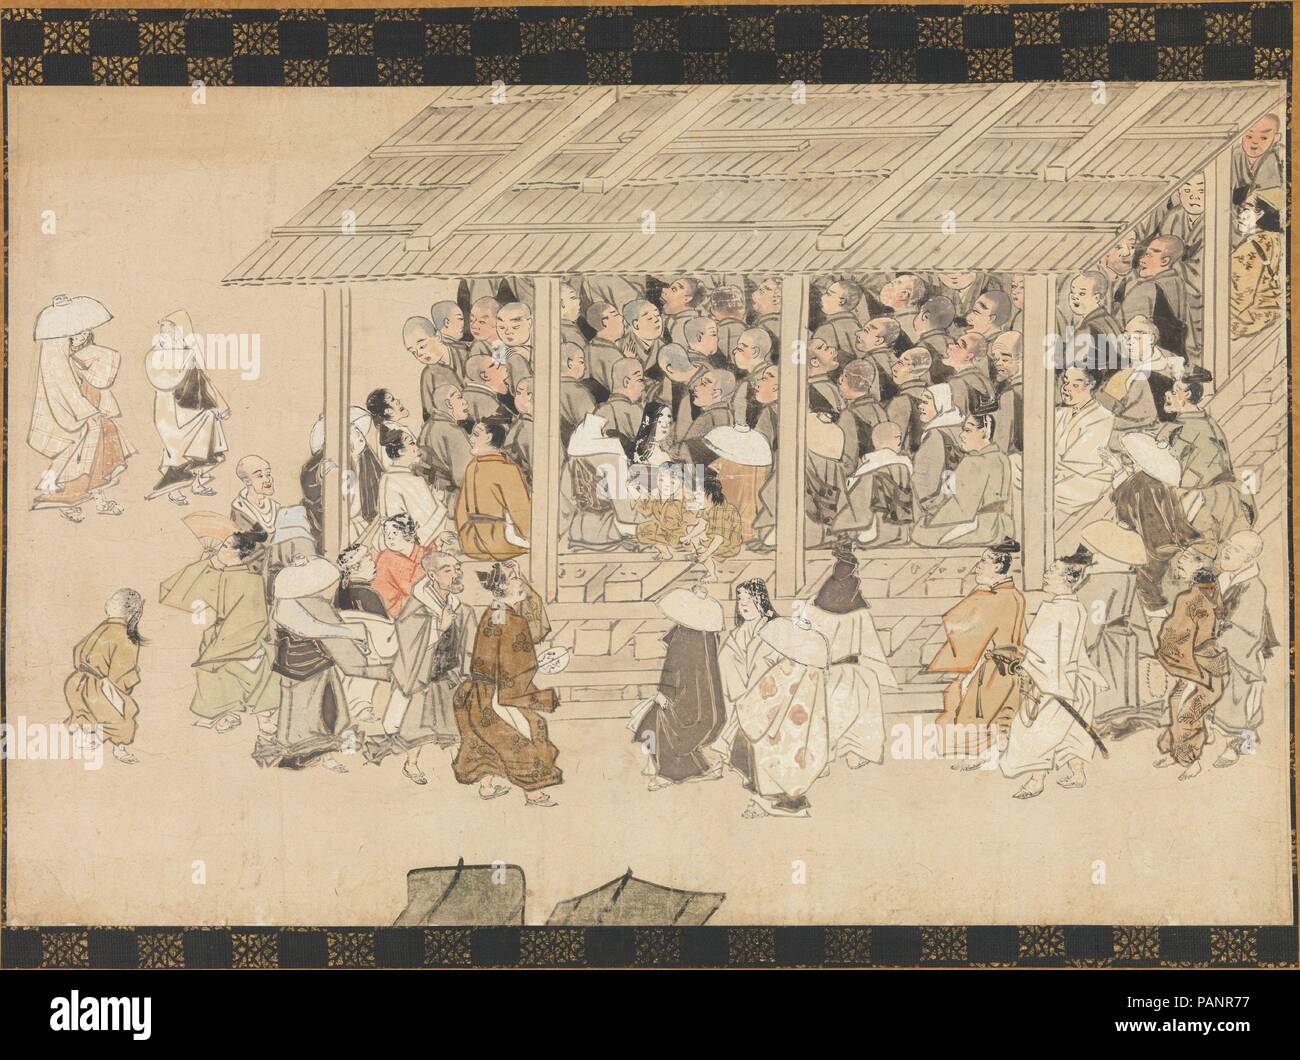 A Nenbutsu Gathering at Ichiya, Kyoto, from the Illustrated Biography of the Monk Ippen and His Disciple Ta'a (Yugyo Shonin engi-e). Culture: Japan. Dimensions: Image: 13 3/4 × 21 1/8 in. (34.9 × 53.7 cm)  Overall with mounting: 48 5/8 × 26 1/4 in. (123.5 × 66.7 cm)  Overall with knobs: 48 5/8 × 28 1/8 in. (123.5 × 71.4 cm). Date: late 14th century.  In this scene, people from all walks of life have gathered to hear the charismatic monk Ippen (1239-1289) perform a recitation of the Nenbutsu prayer invoking Amitabha. The crowd's anticipation nearly bursts from the page as they wait for his inca Stock Photo